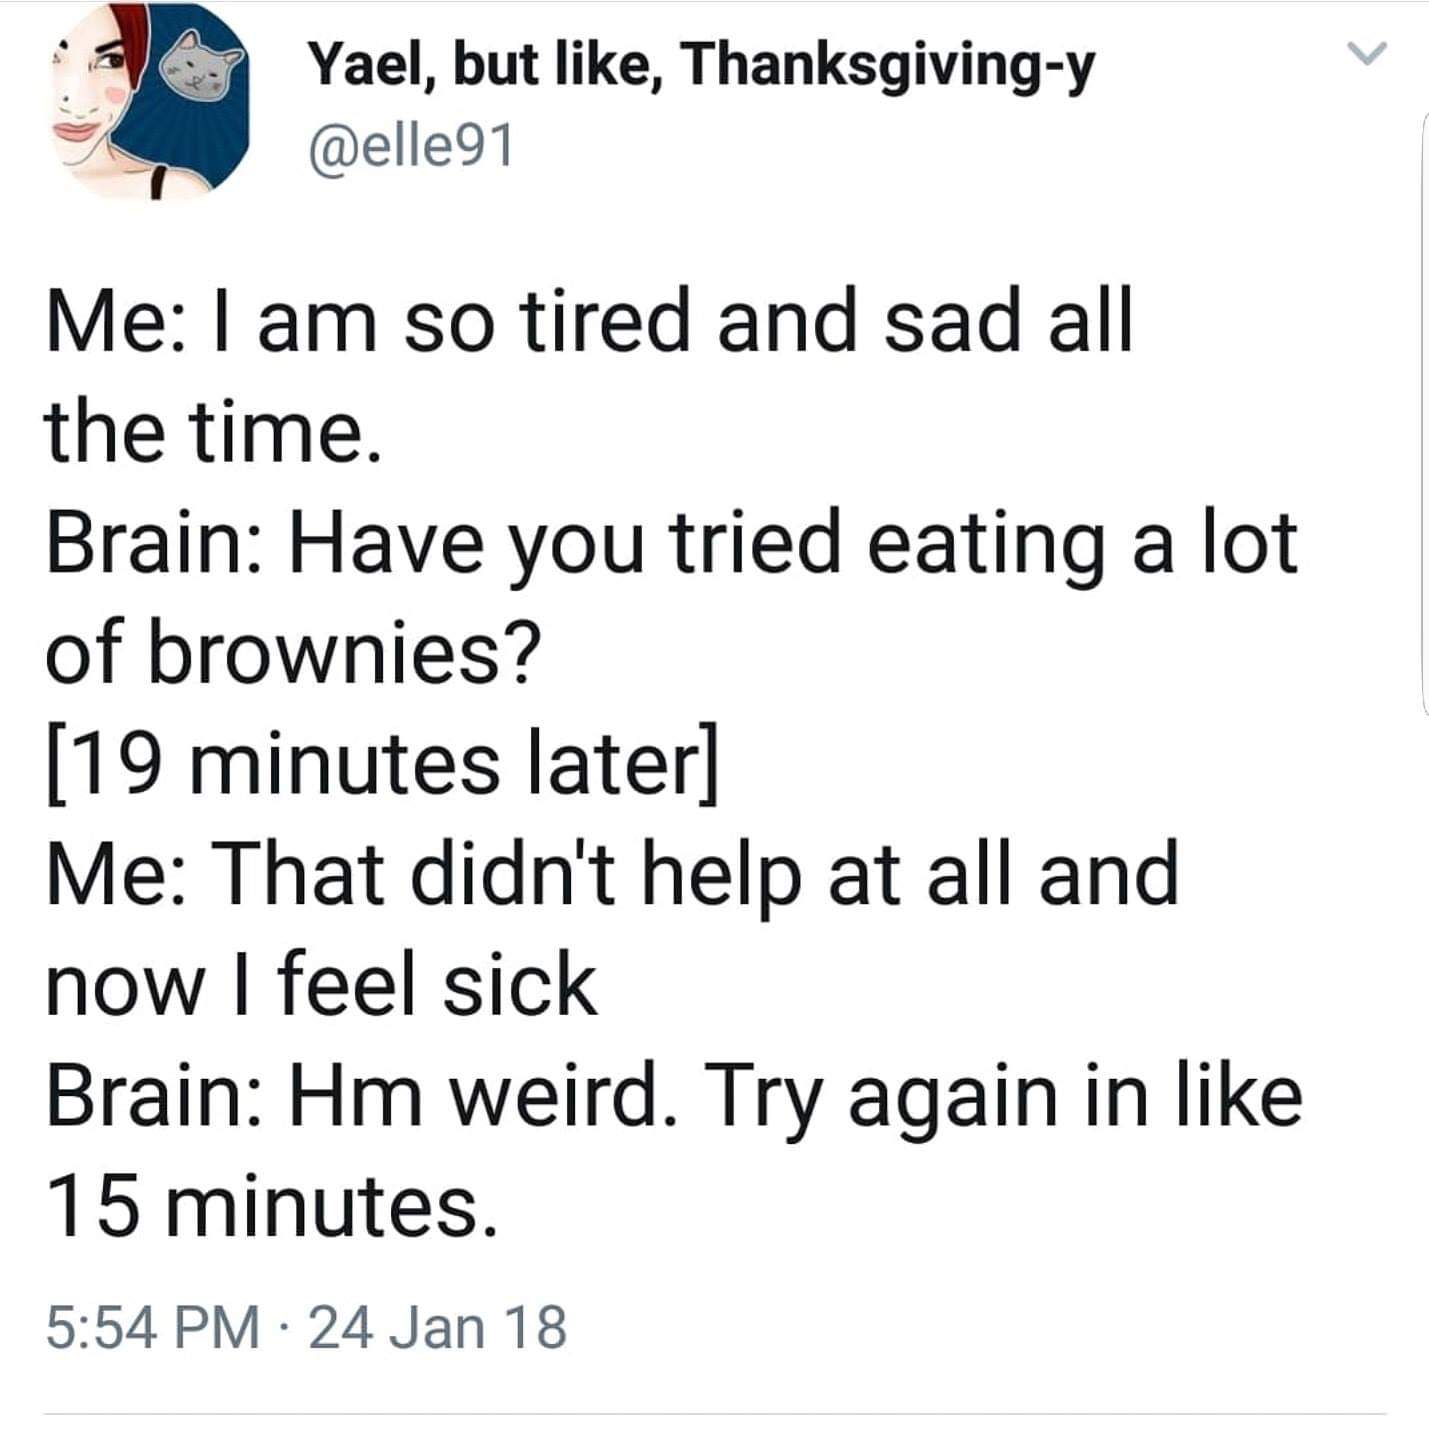 Depression meme - angle - Yael, but , Thanksgivingy Me I am so tired and sad all the time. Brain Have you tried eating a lot of brownies? 19 minutes later Me That didn't help at all and now I feel sick Brain Hm weird. Try again in 15 minutes. 24 Jan 18